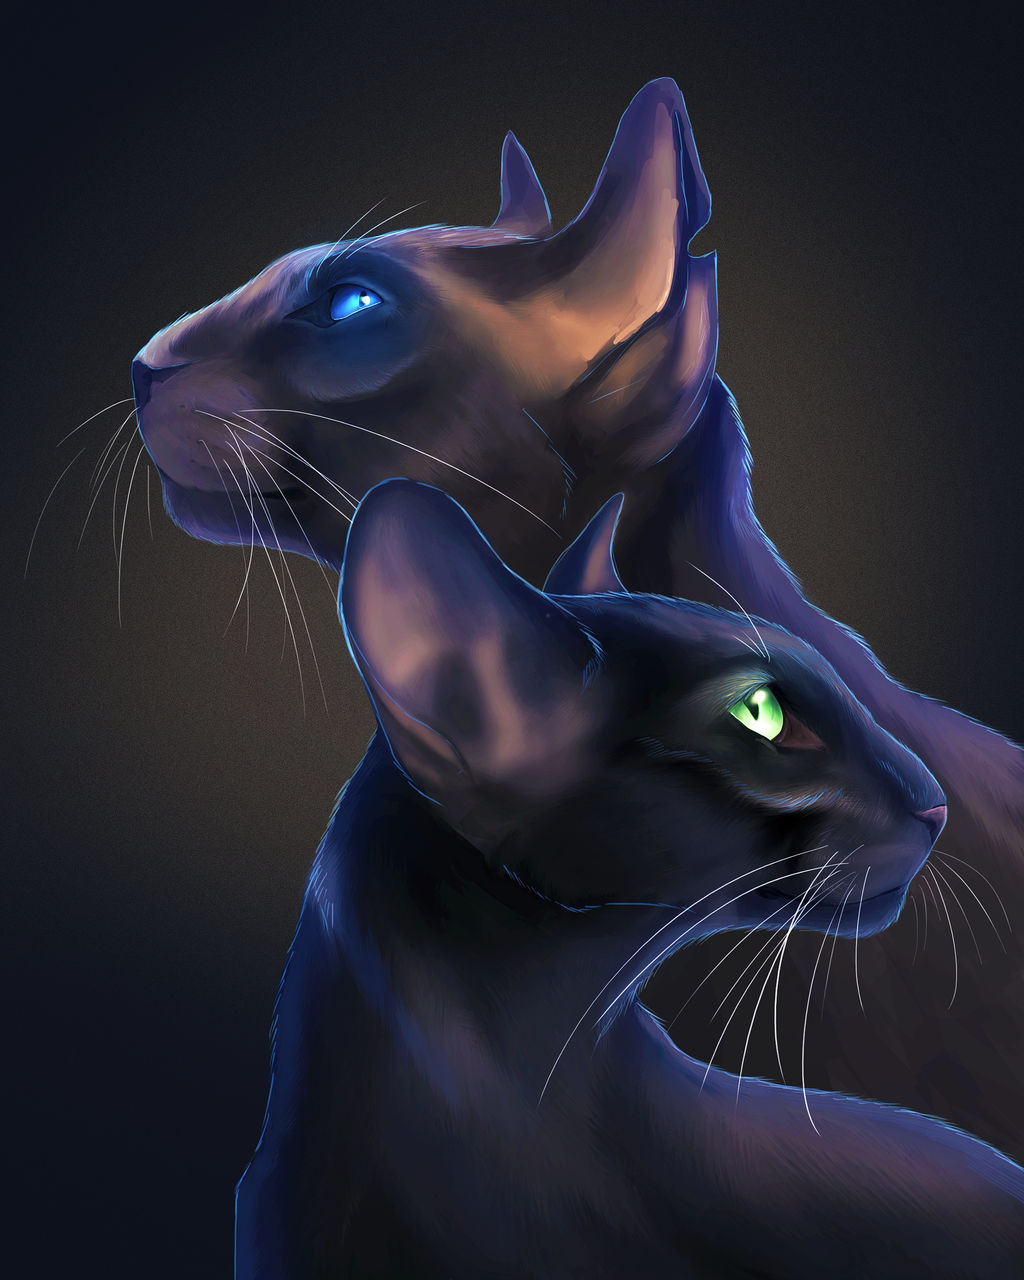 Ravenpaw and Barley by Graypillow  Warrior cat drawings, Warrior cats fan  art, Warrior cats